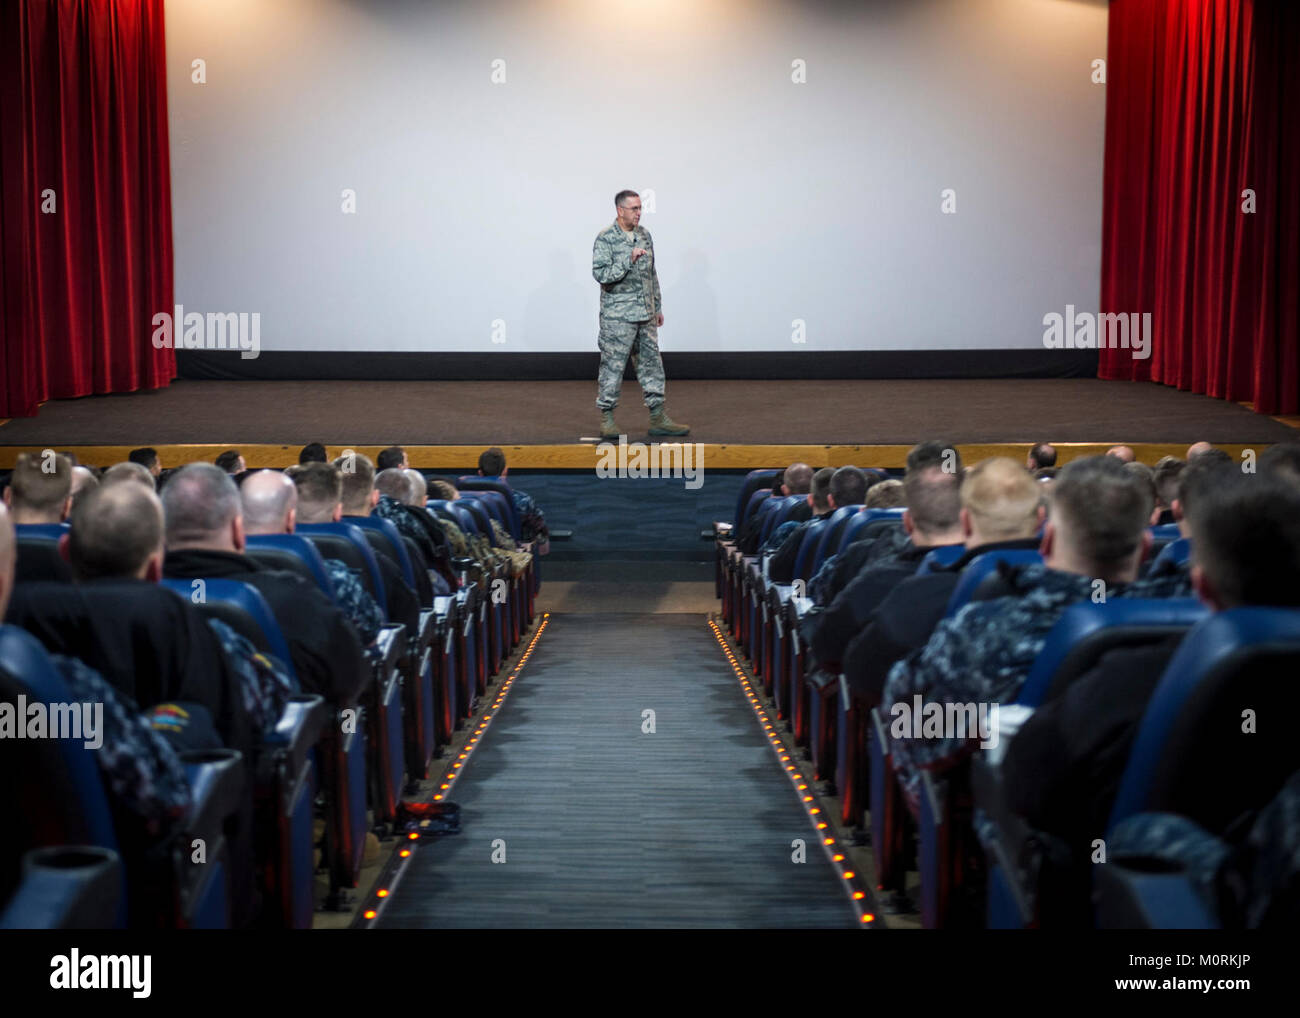 BANGOR, Wash. (Jan. 18, 2018) - U.S. Air Force Gen. John Hyten, commander of U.S. Strategic Command, speaks at an all hands call for over 350 Sailors, Marines, and civilians in the base theater at Naval Base Kitsap-Bangor, Wash., Jan 18, 2018. Hyten visited staff and facilities assigned to Commander Submarine Group 9  at Naval Base Kitsap-Bangor to see the operations of one leg of the nuclear triad.  (U.S. Navy Stock Photo